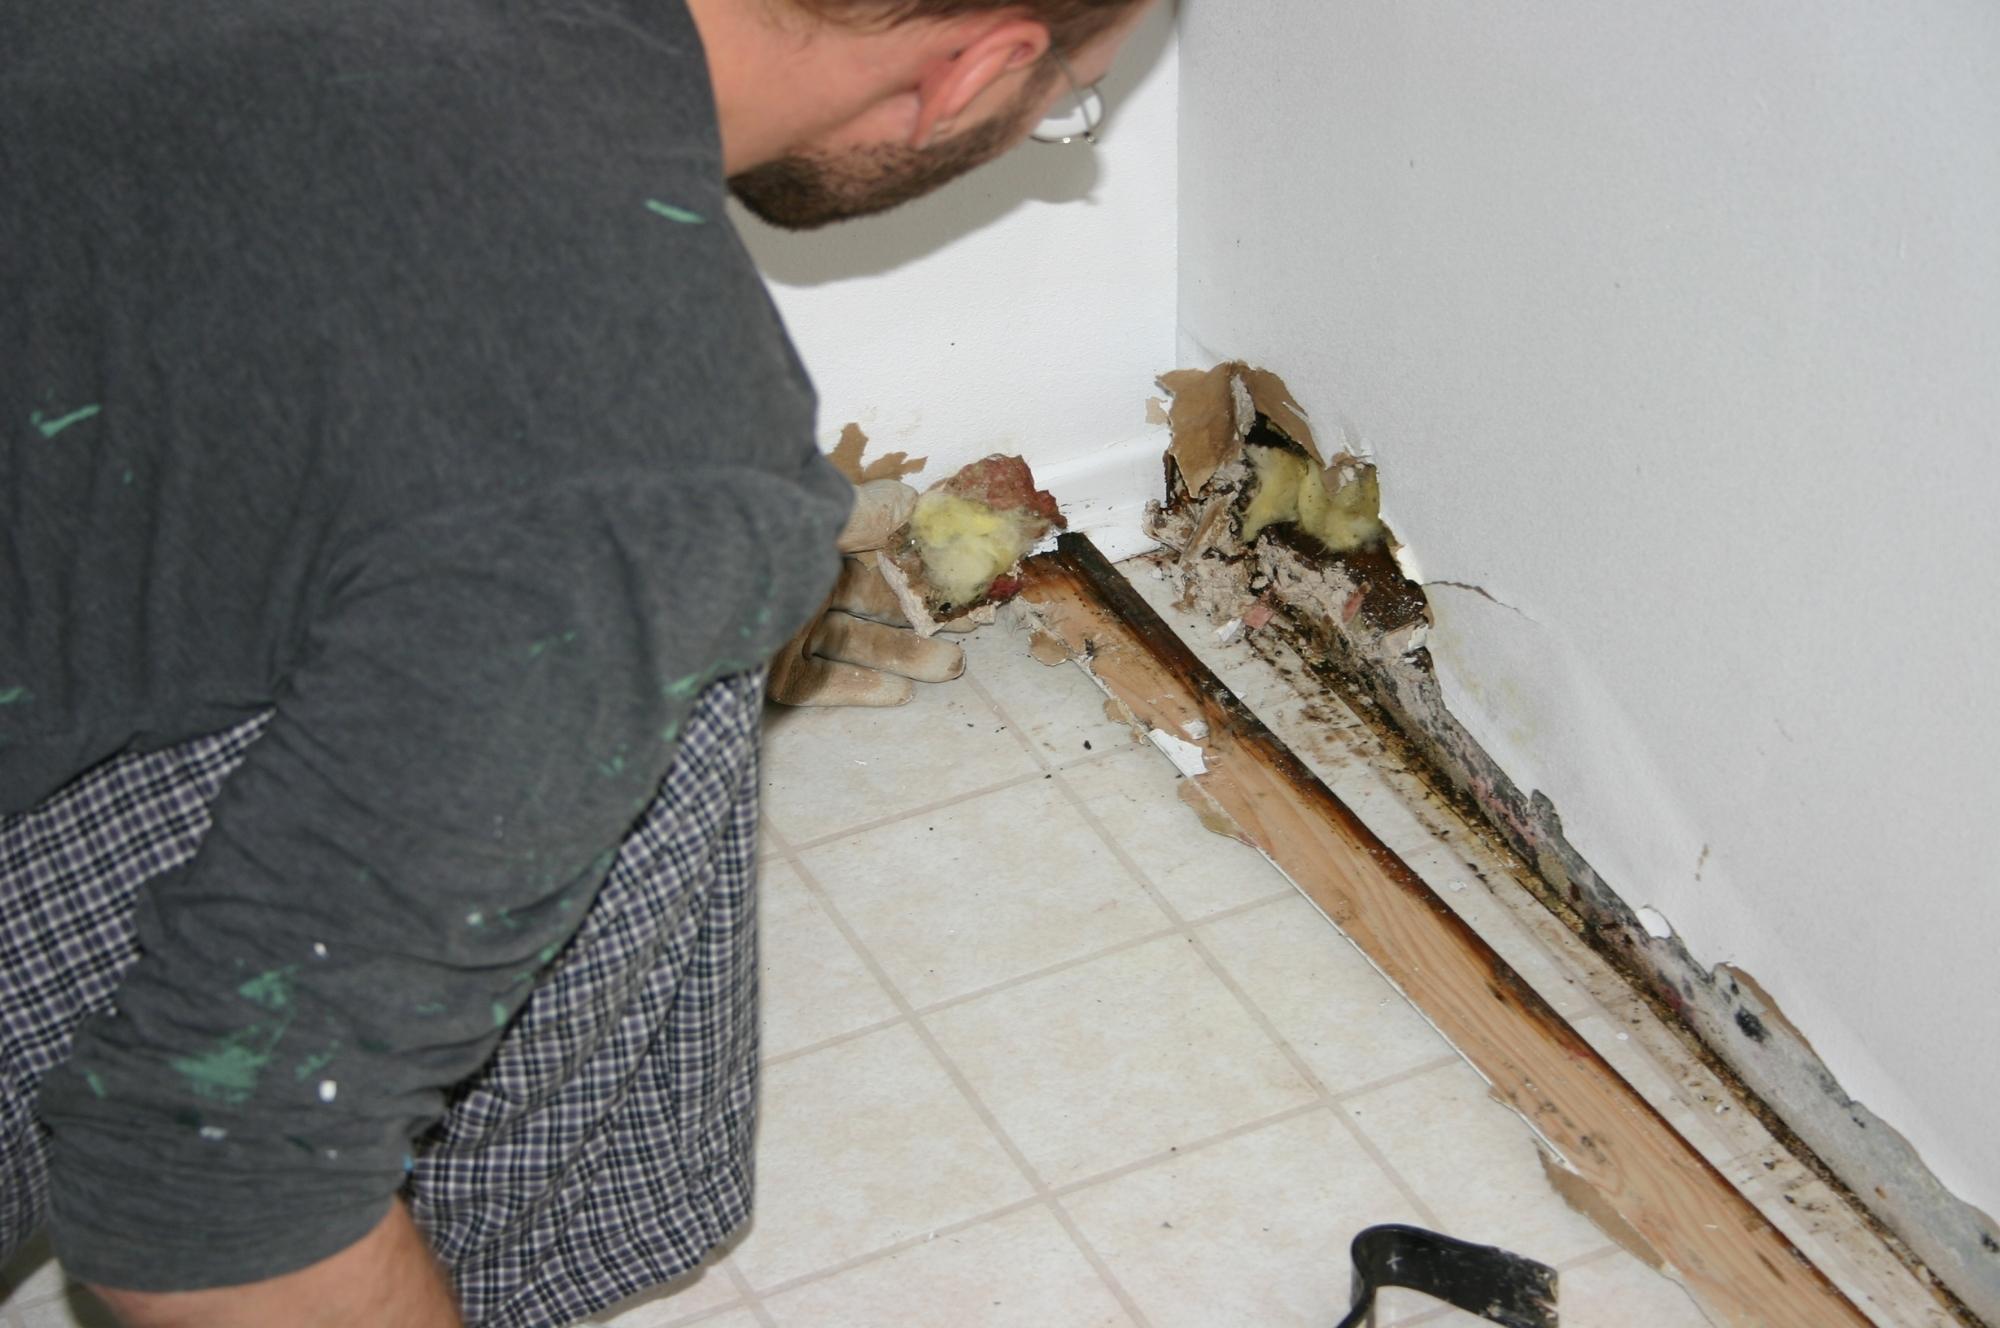 Alconero and Associates - Water damage in Miami: How to file an insurance claim